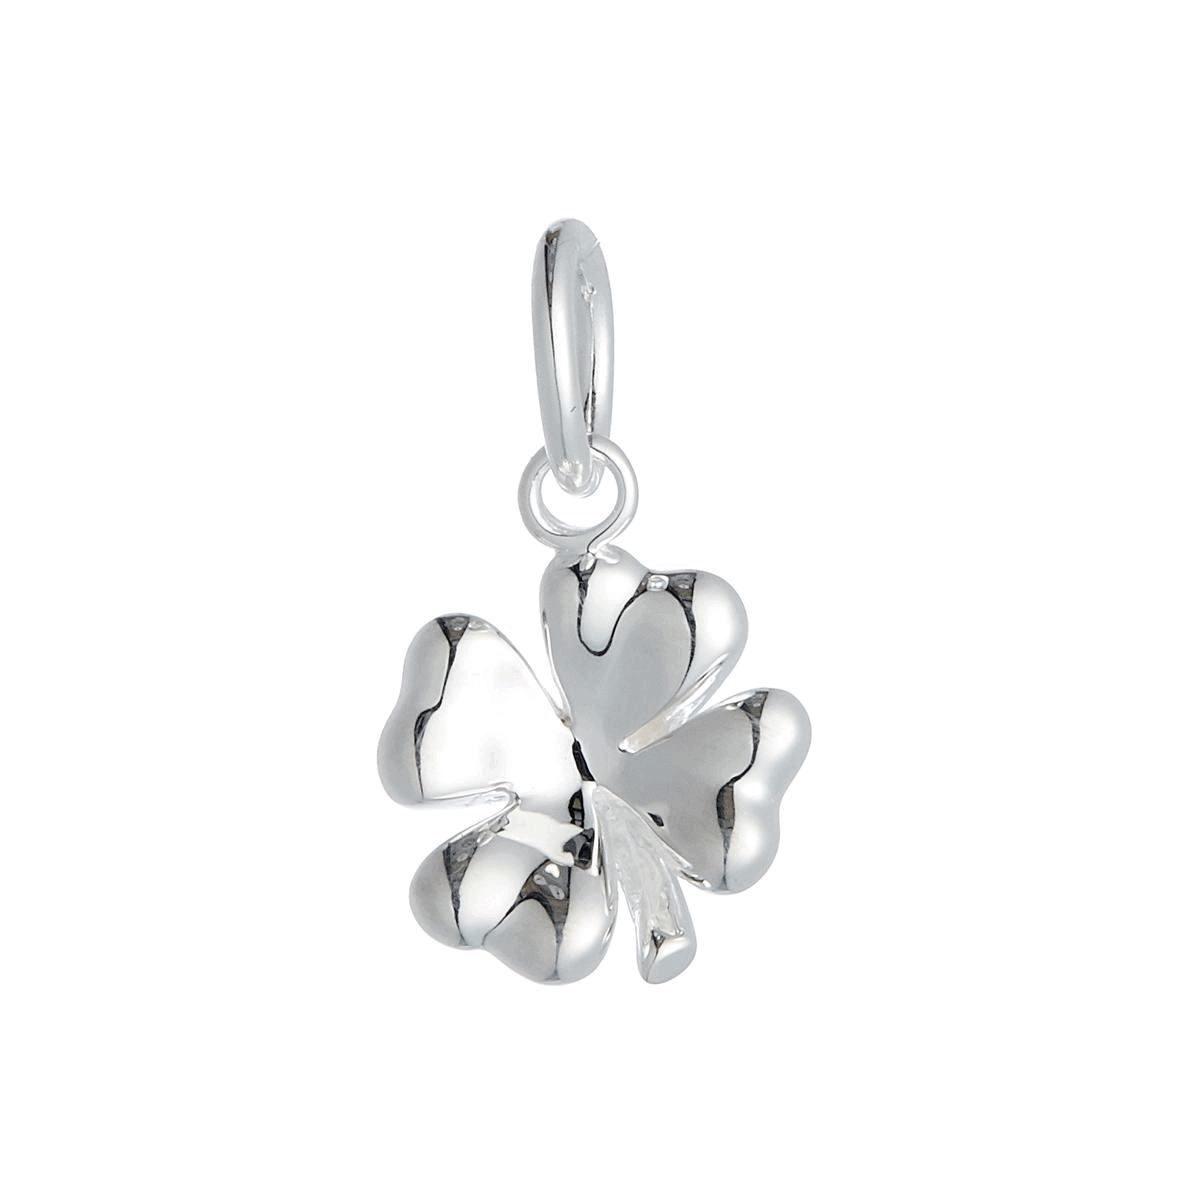 silver four leaf clover lucky charm for bracelets and necklaces